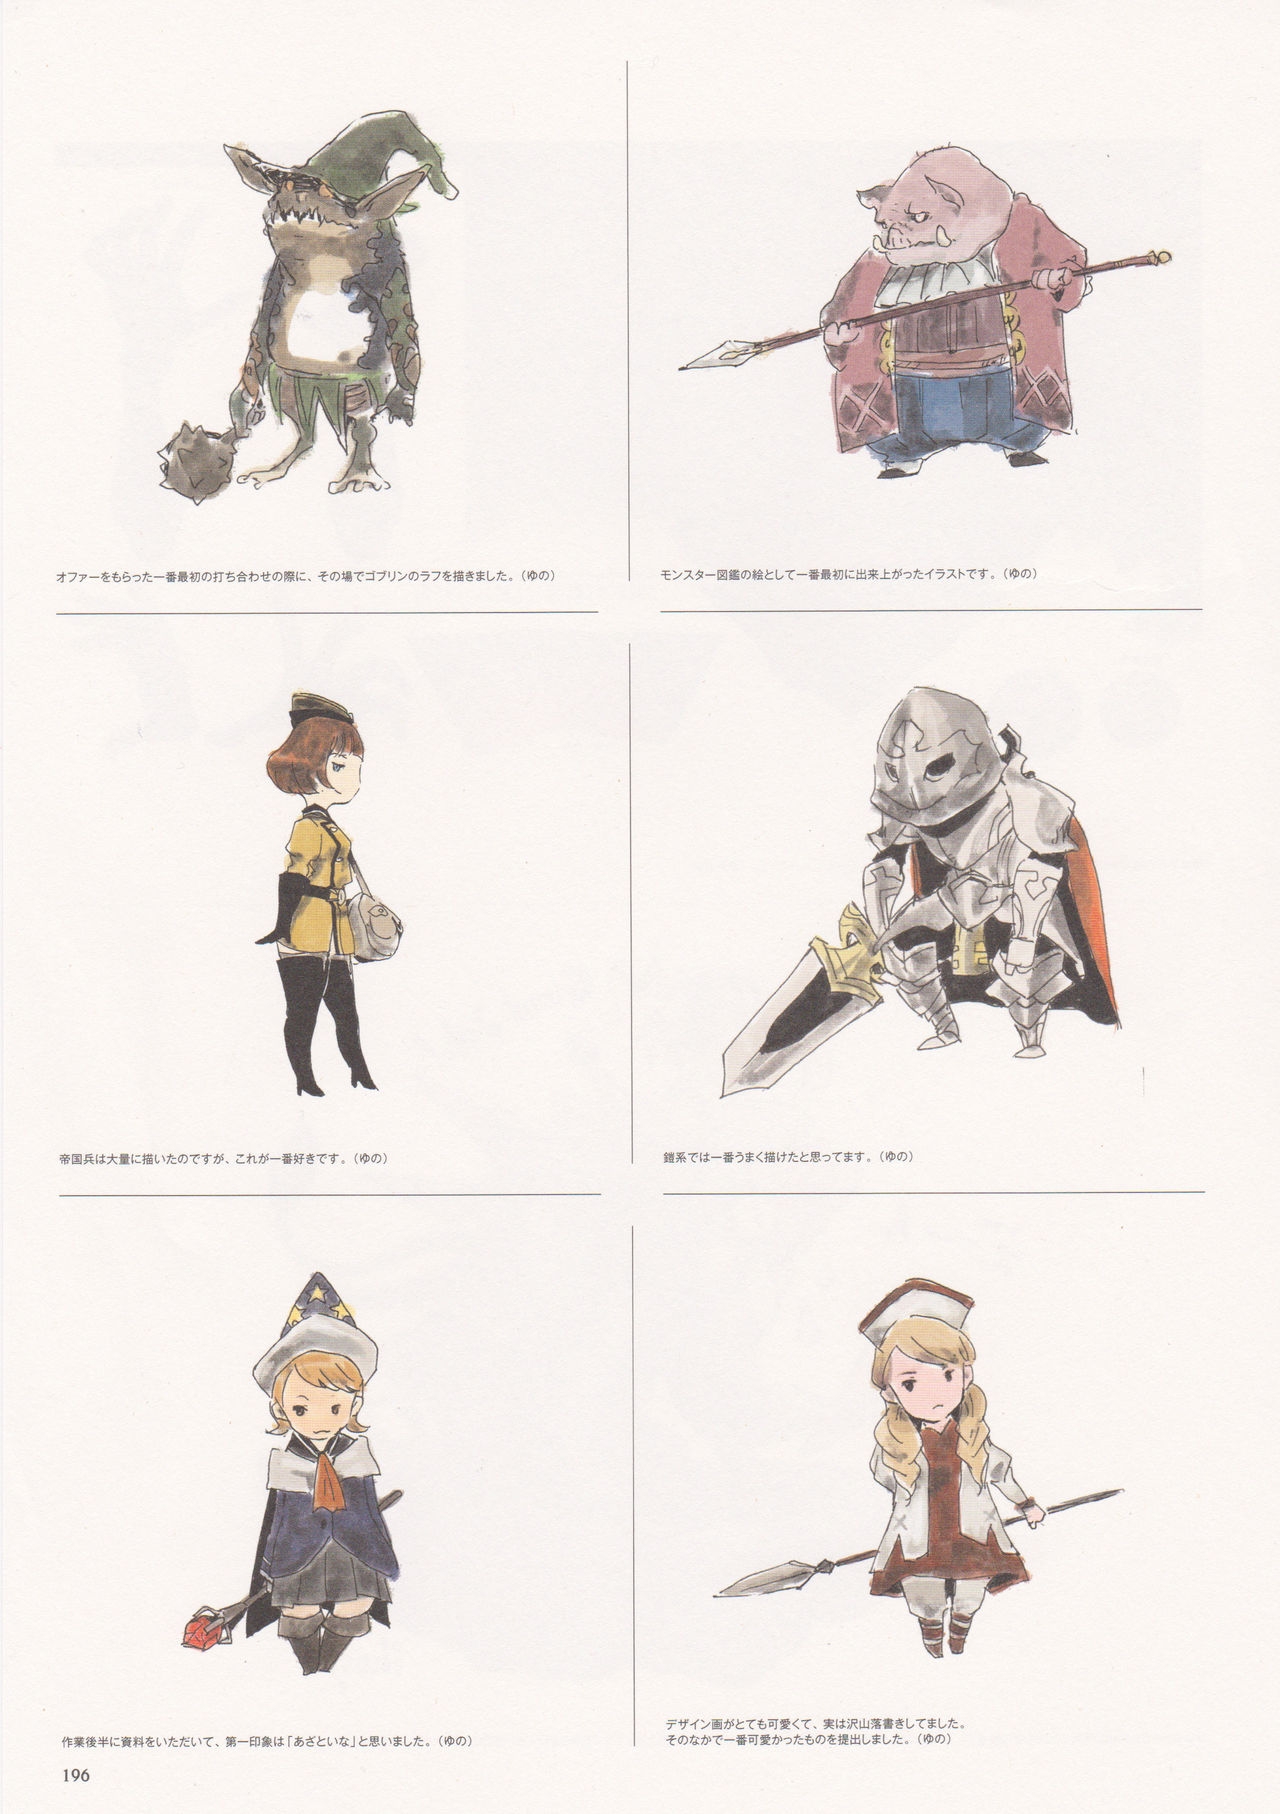 Bravely Second - End Layer - Design Works THE ART OF BRAVELY 2013-2015 196